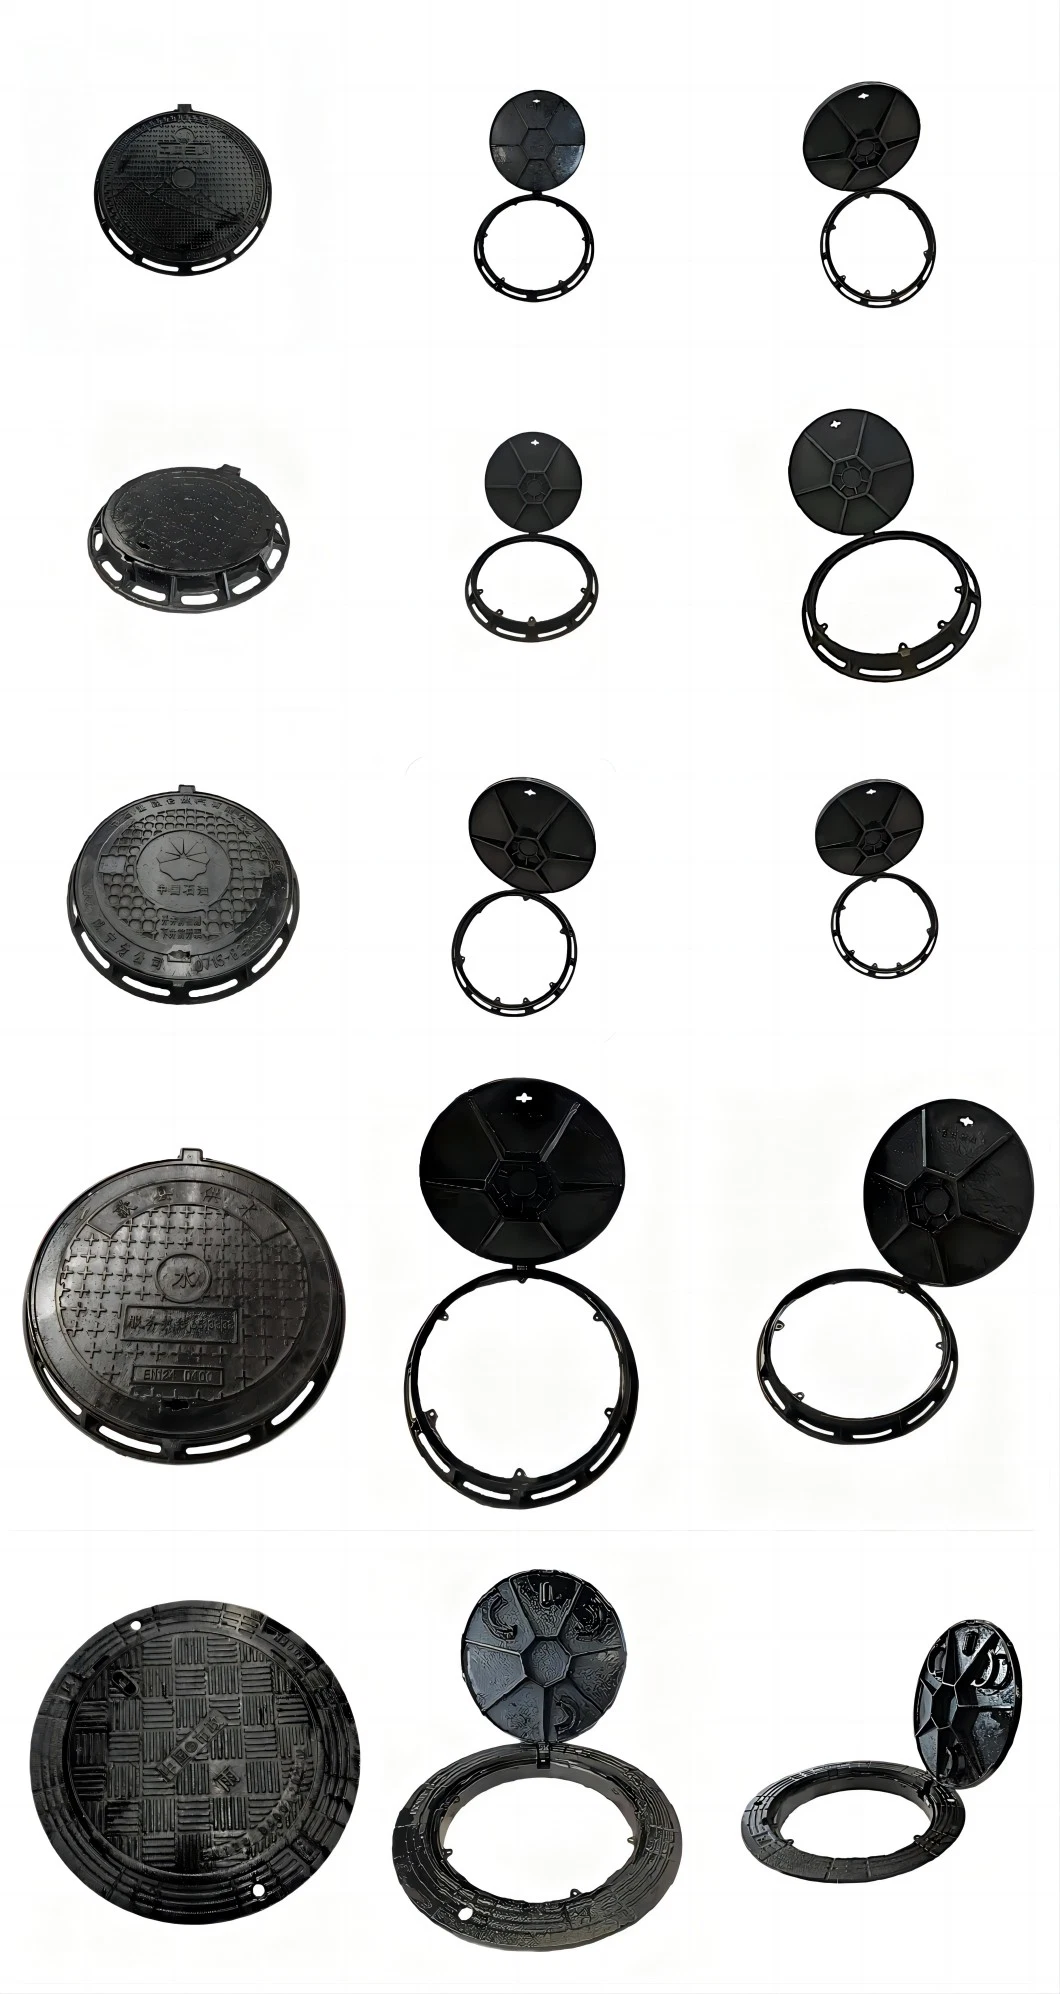 En124 Cast Iron Round Manhole Cover with Seat